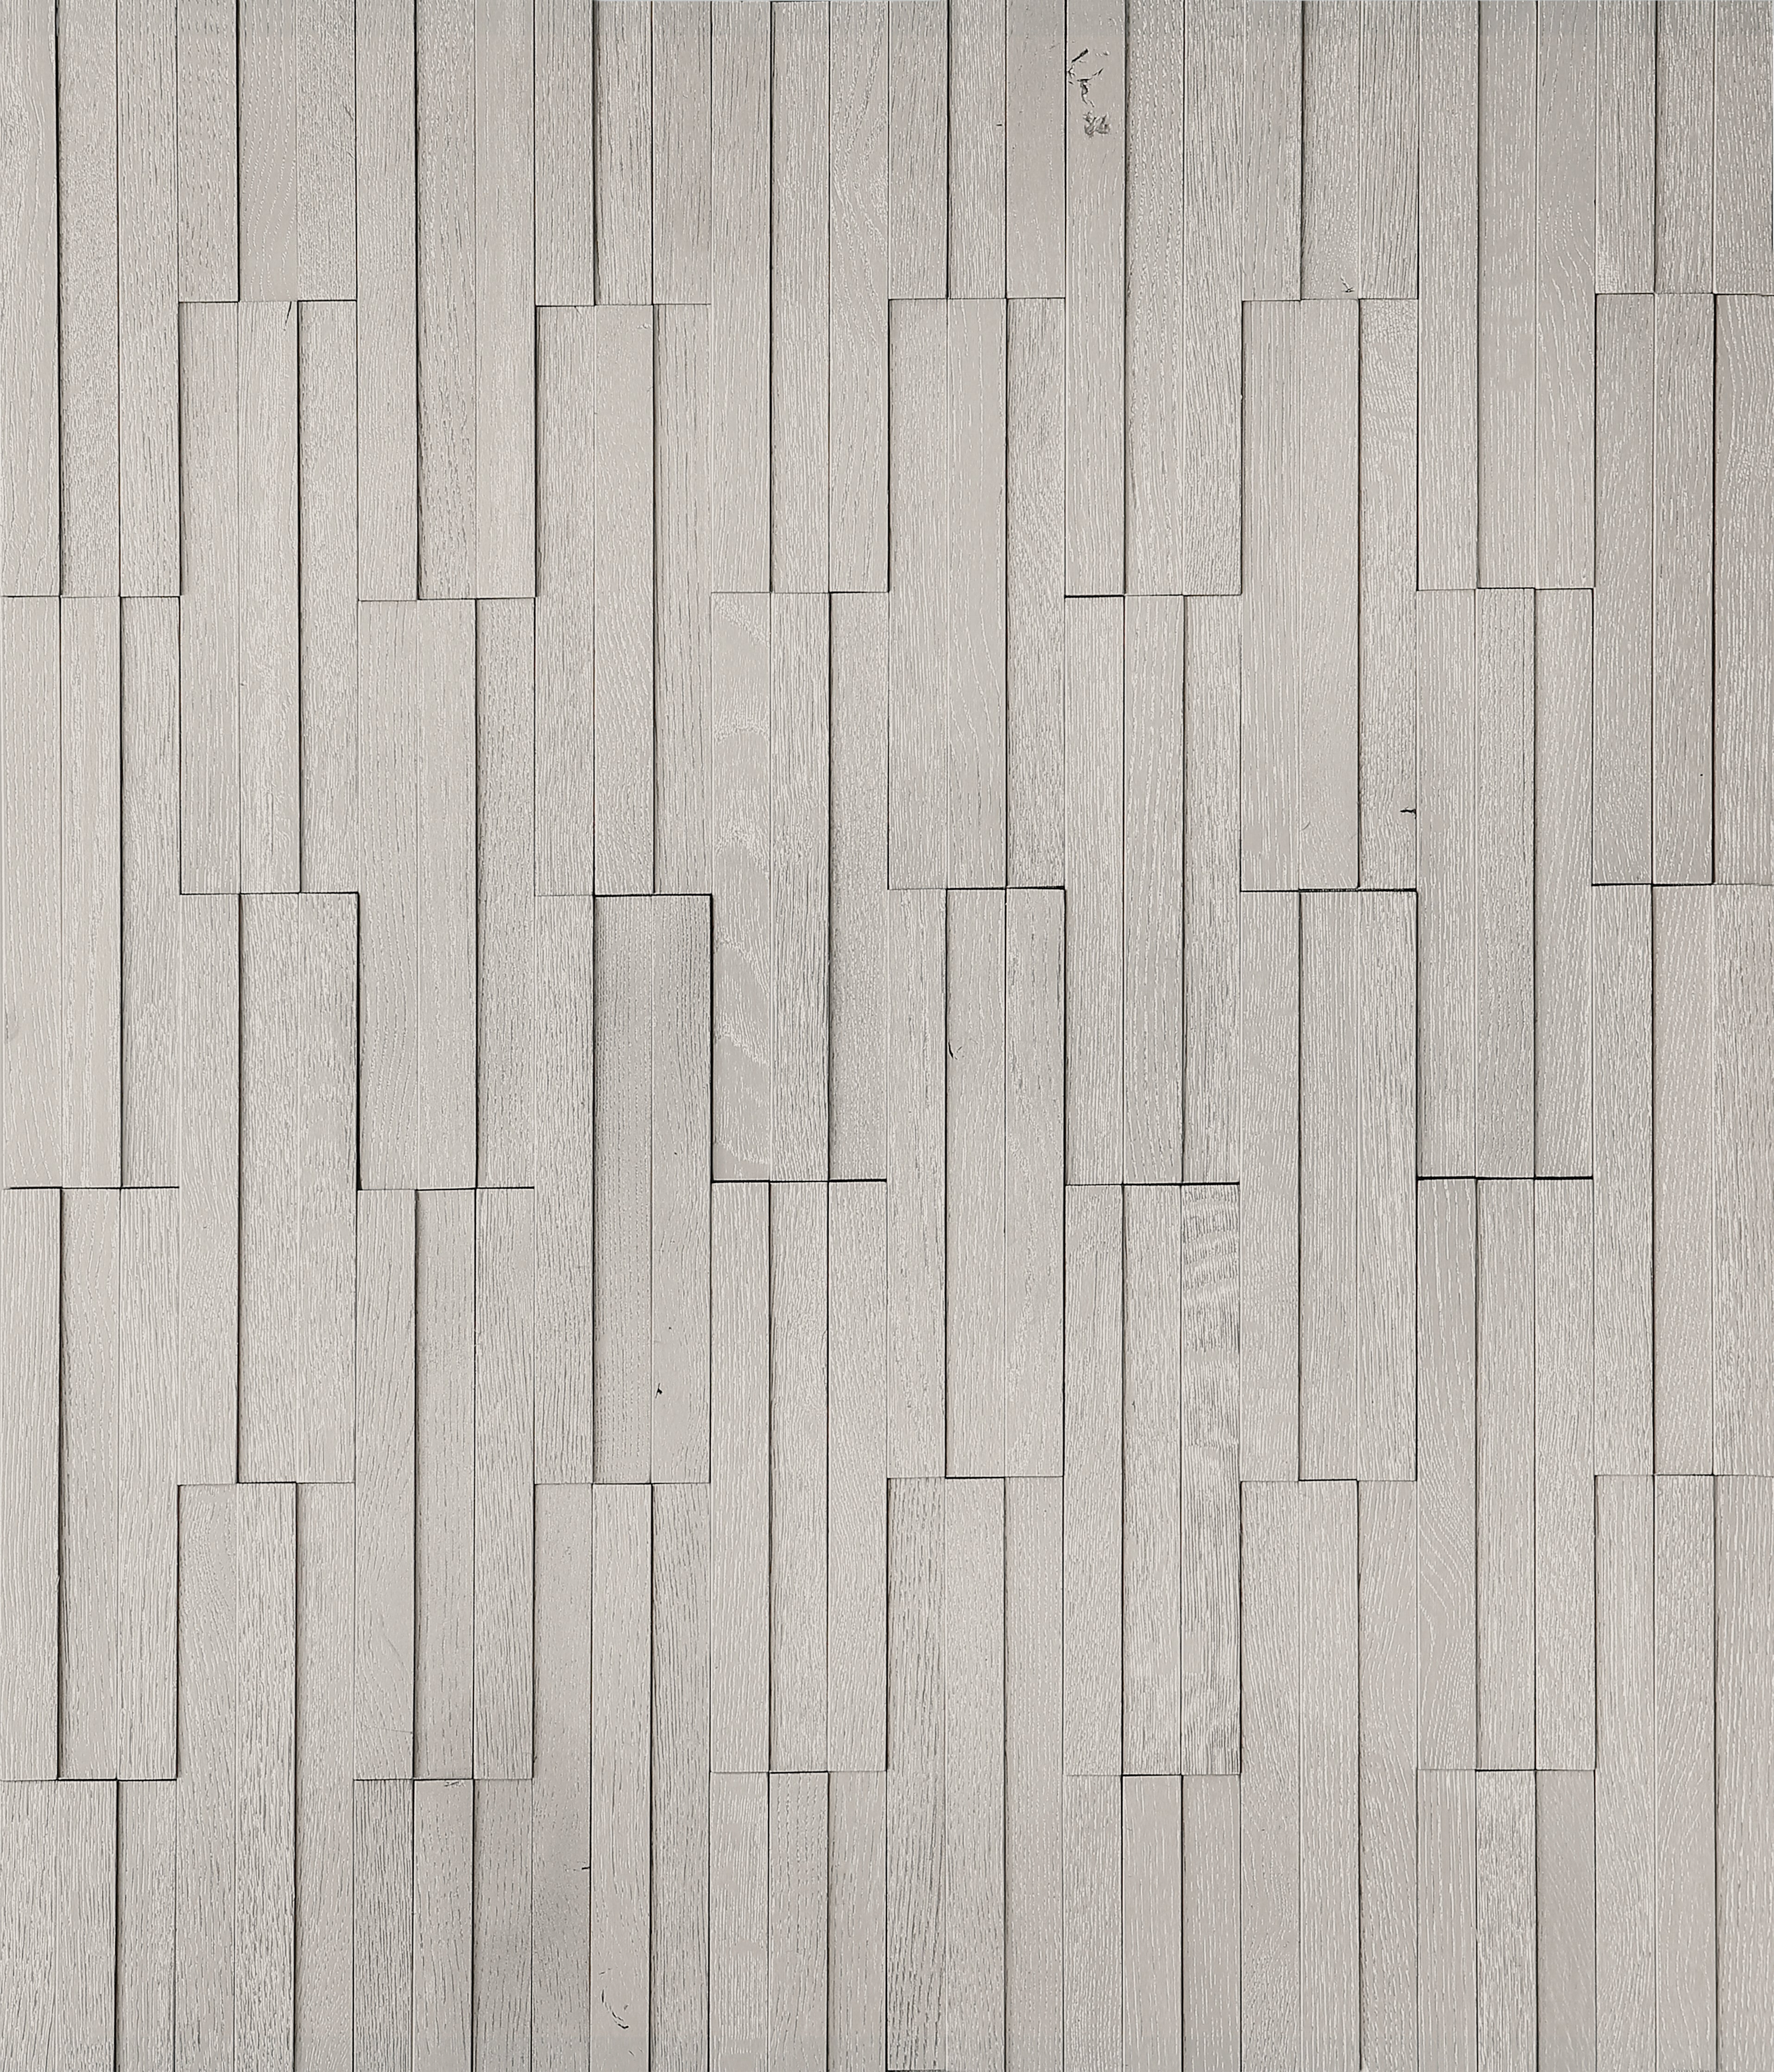 duchateau inceptiv kuadra silver oak three dimensional wall natural wood panel lacquer for interior use distributed by surface group international